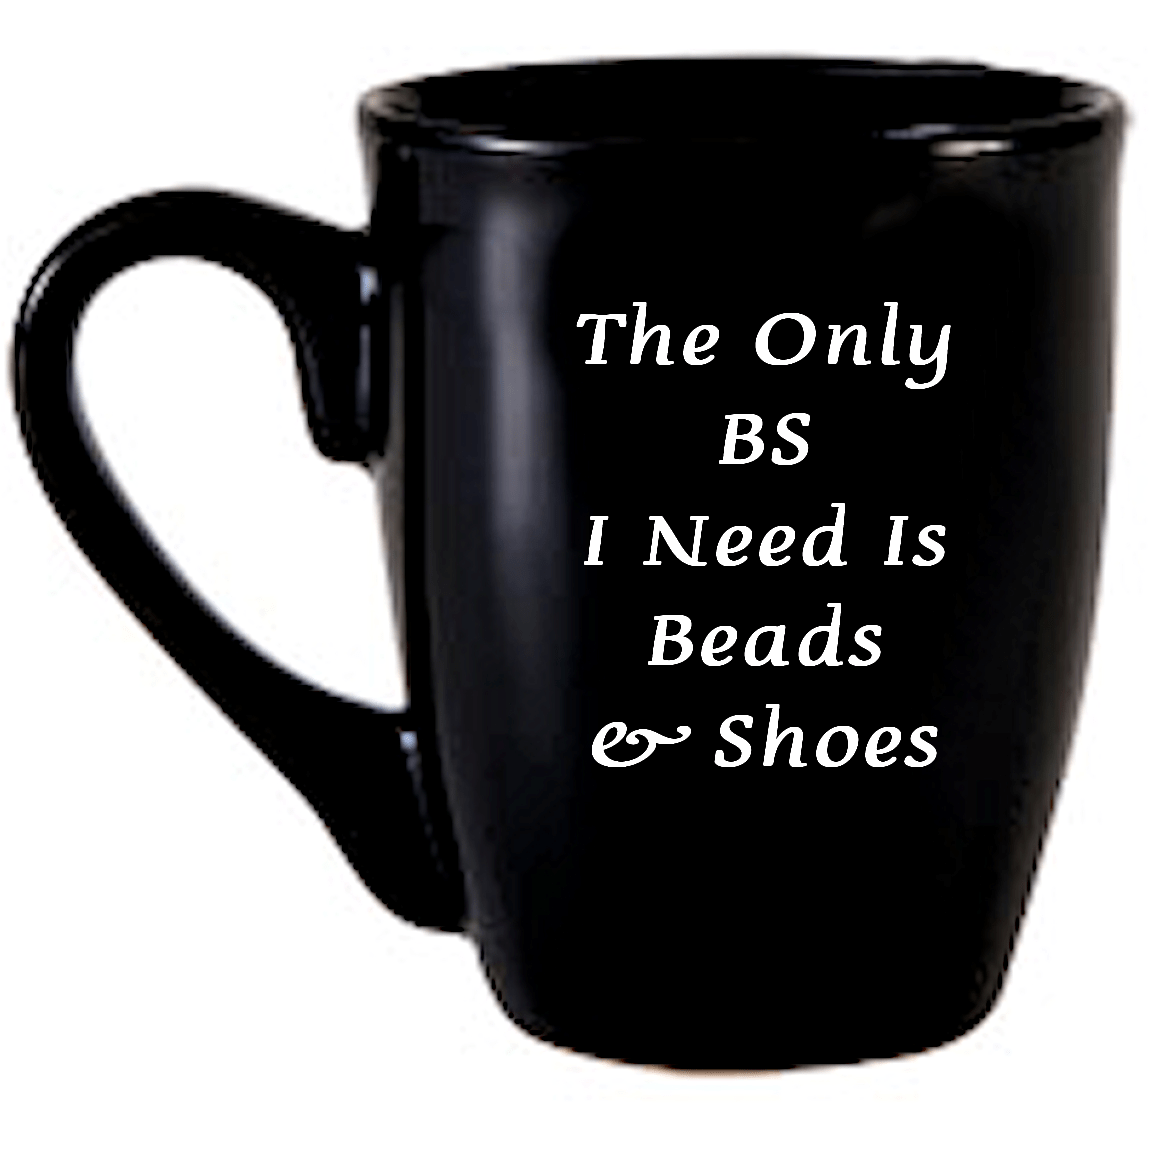 The Only BS I Need Is Beads and Shoes Coffee Mug